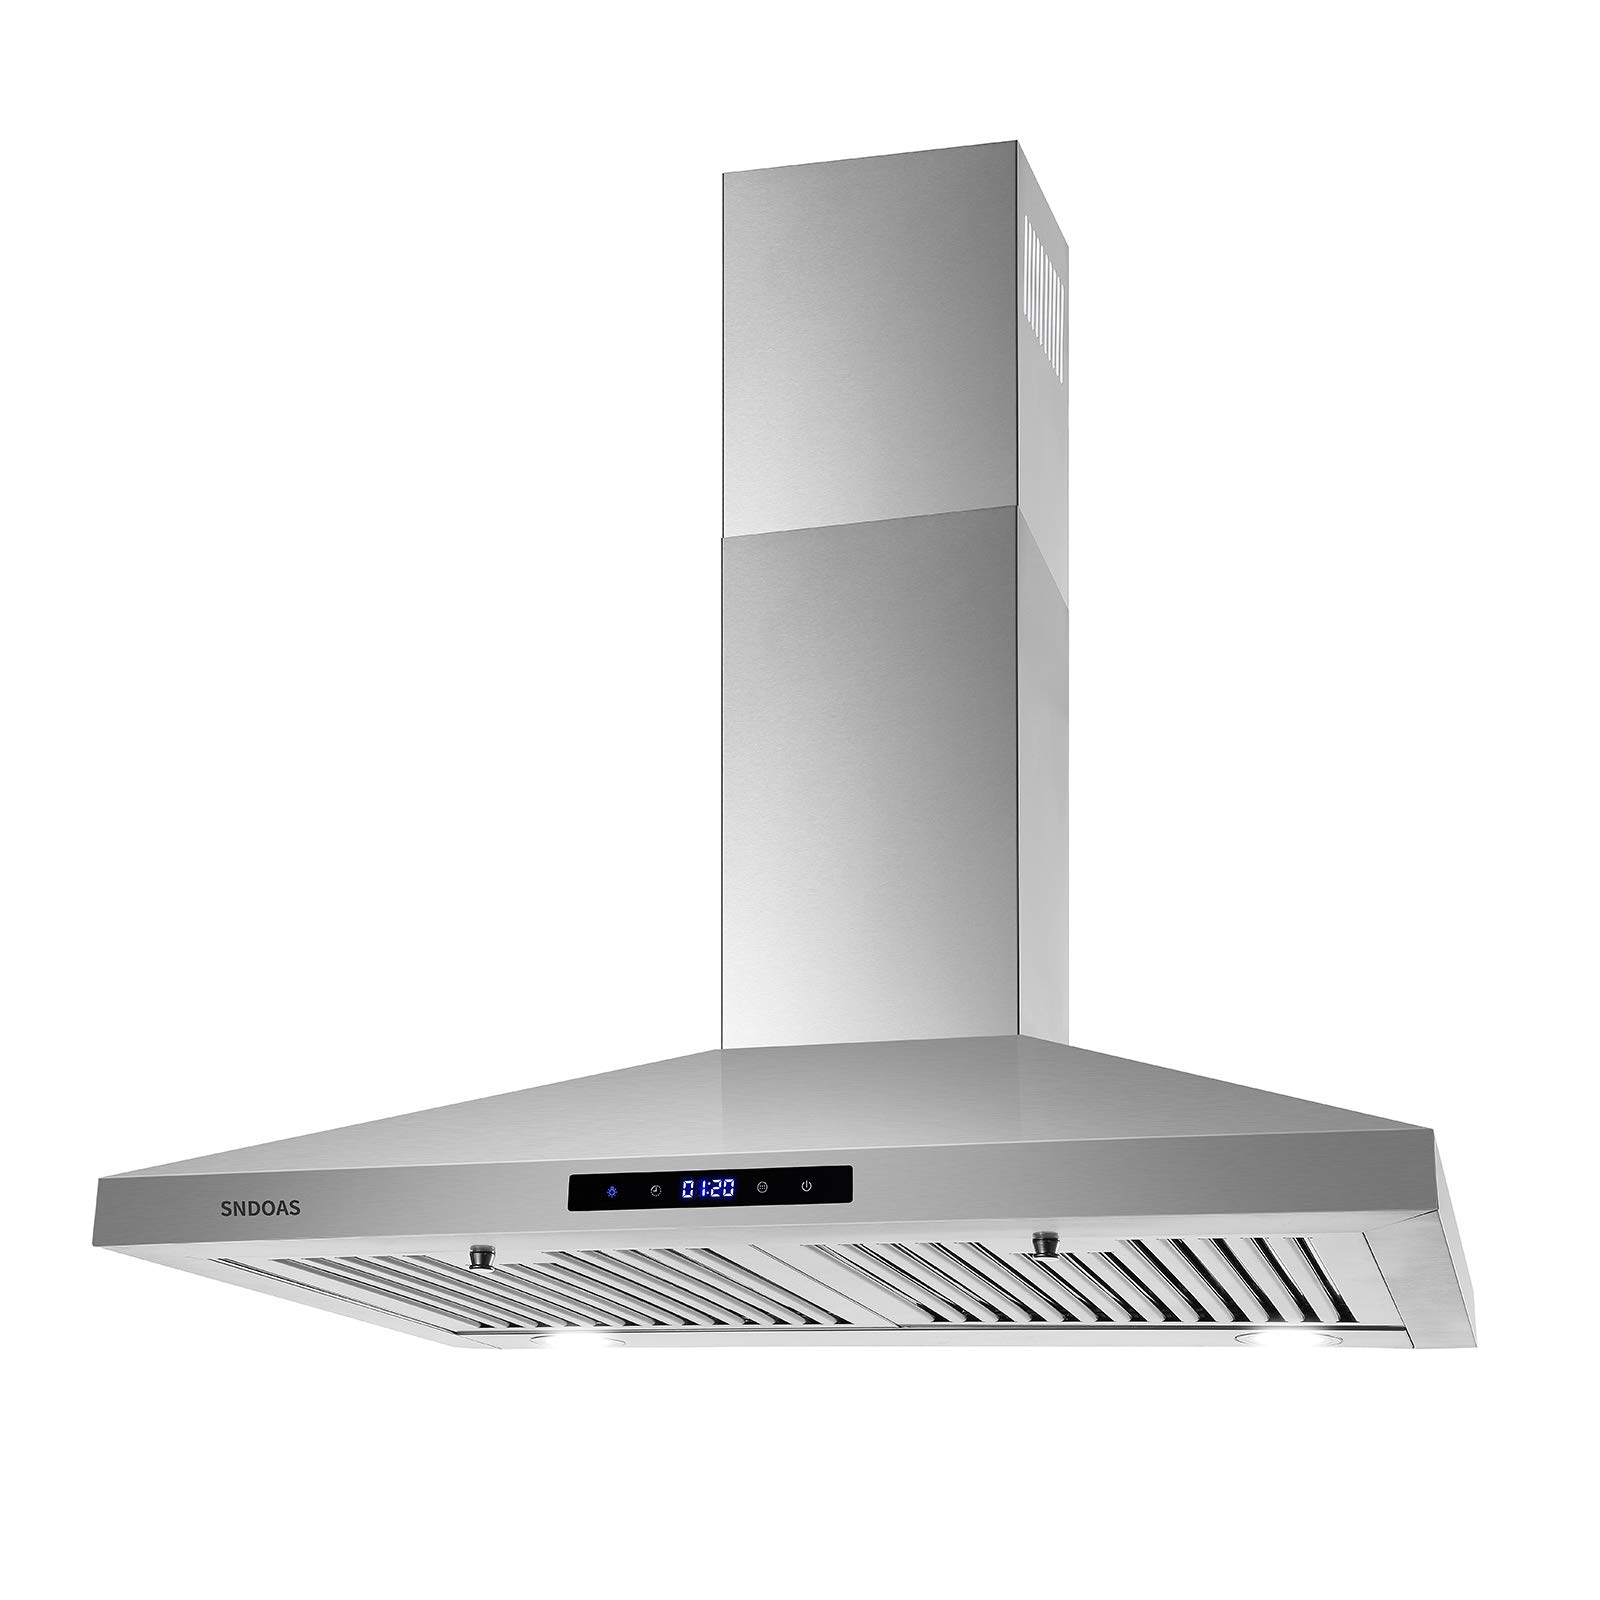 SNDOAS Range Hood 30 inches,Stainless Steel Wall Mount Range Hood,Vent Hood 30 inch wTouch control,DuctedDuctless convertible,ch